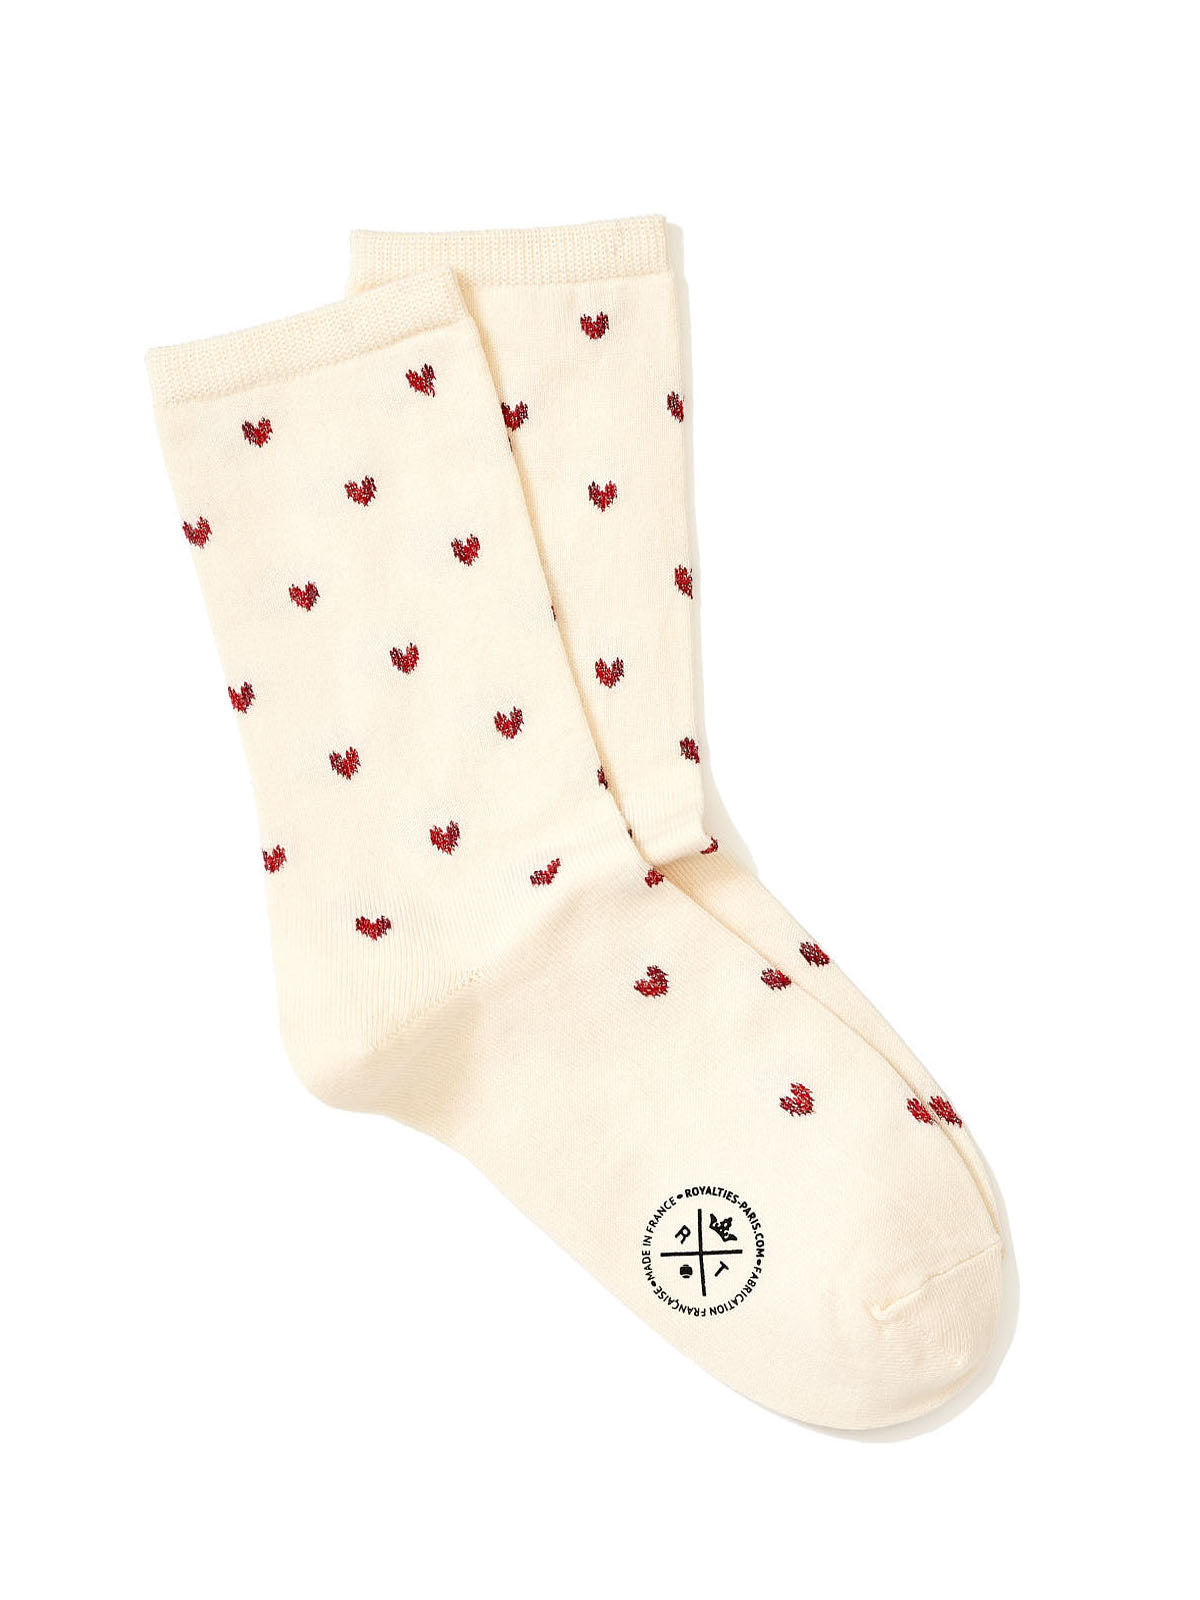 Chaussettes motif coeur LOVE brillantes, ROYALTIES, made in France